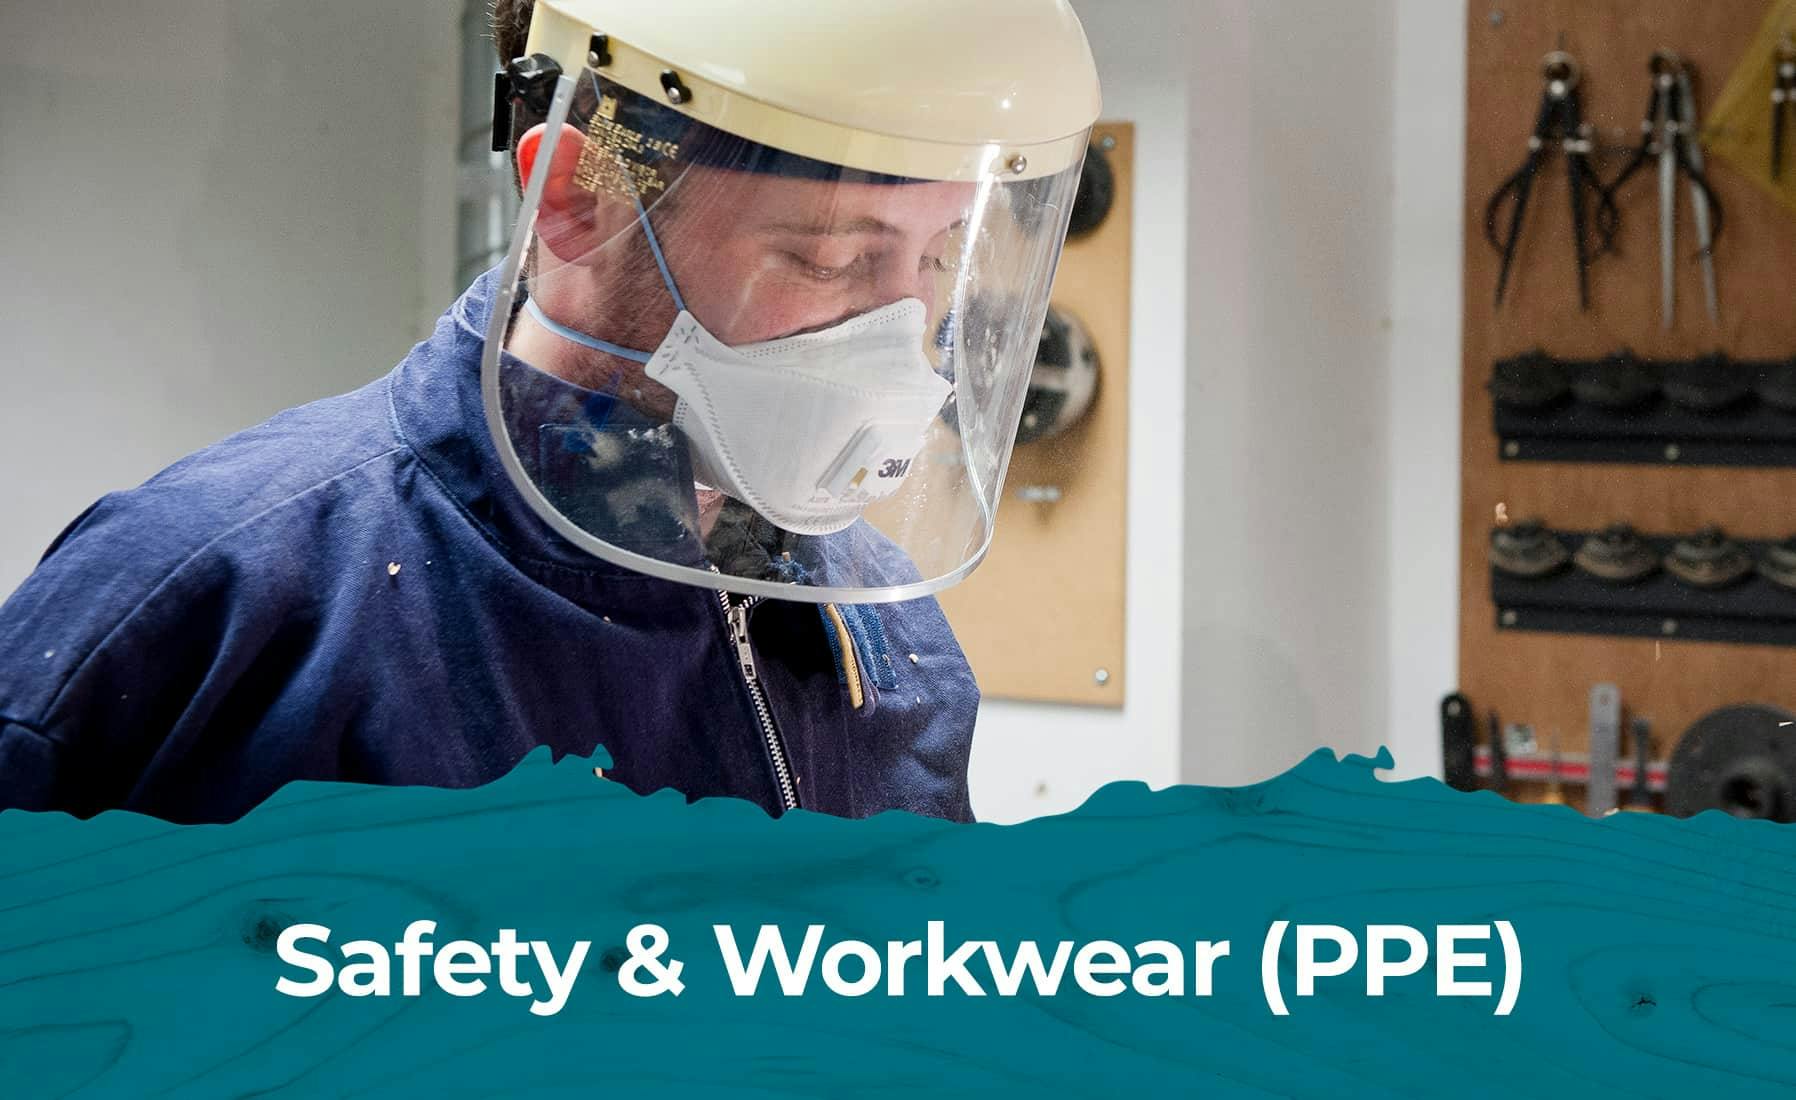 Safety and Workwear PPE